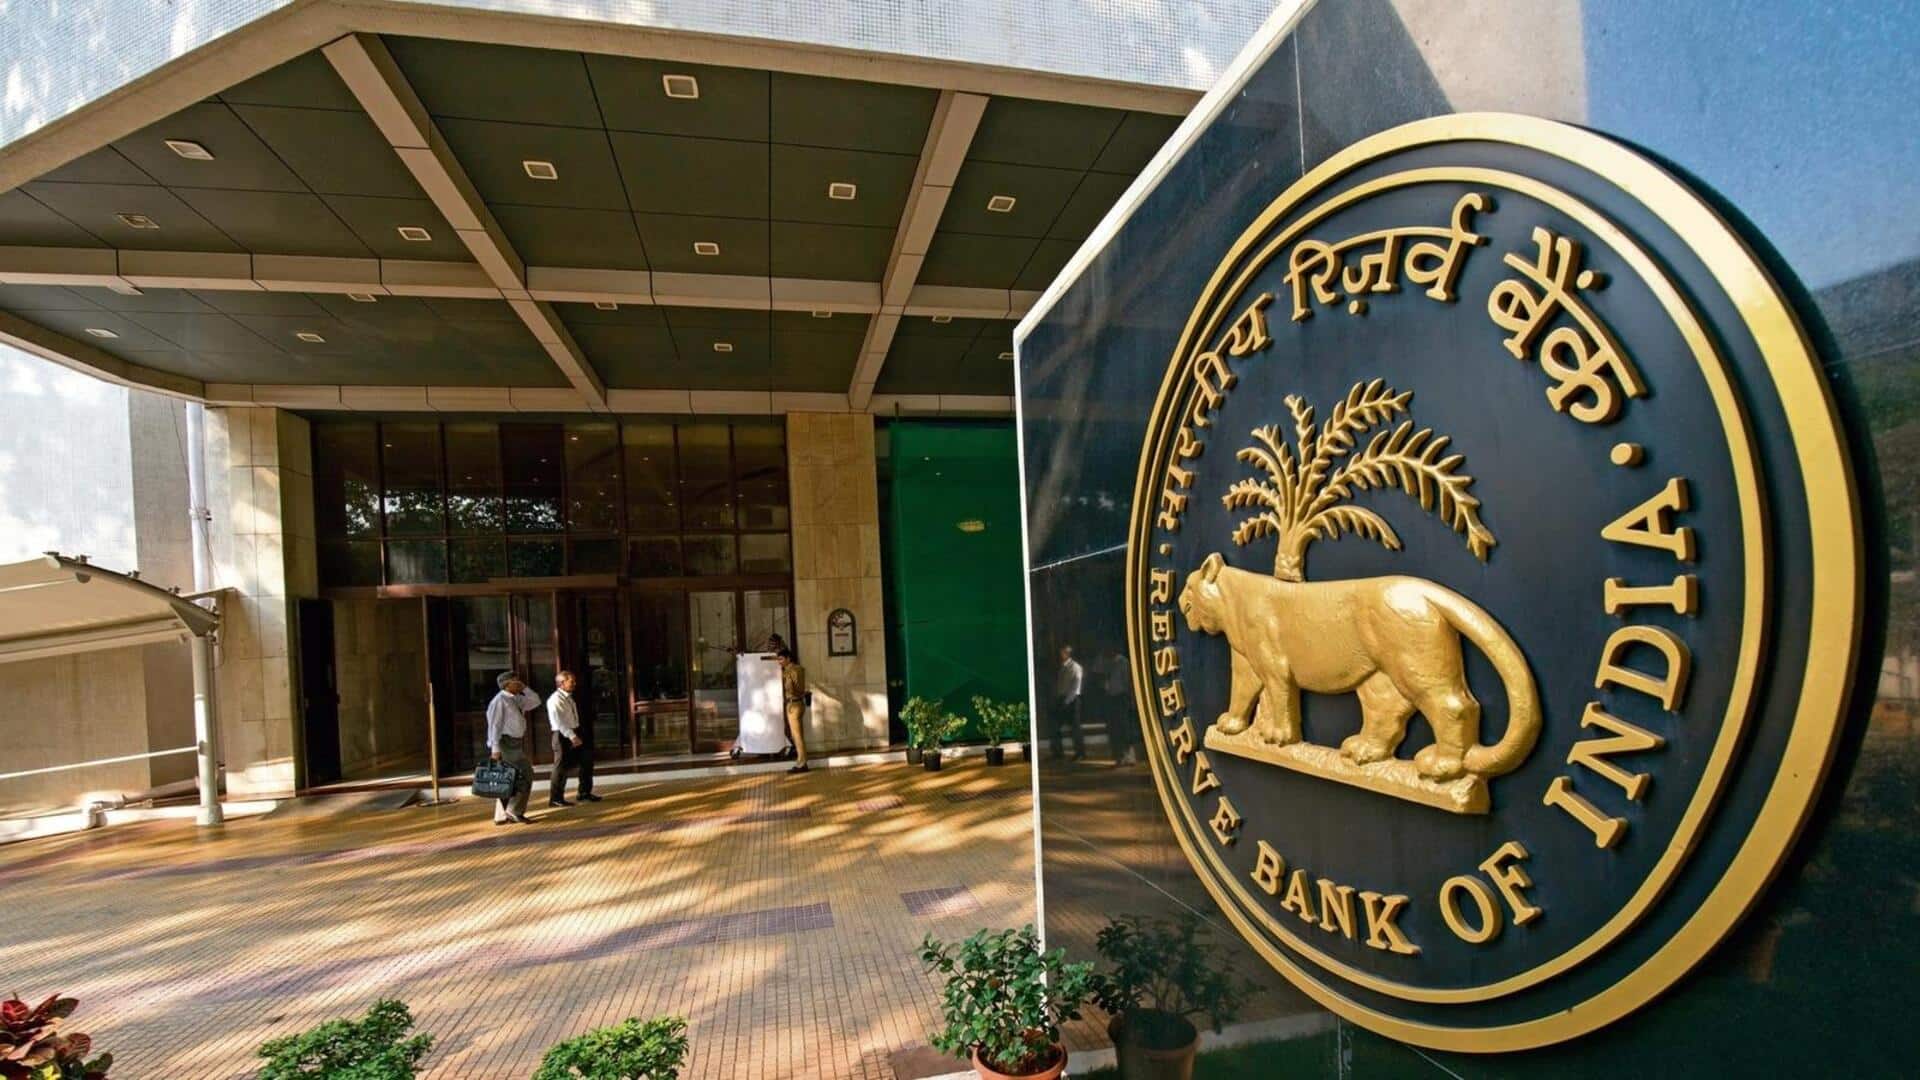 RBI and other banks in Mumbai receive bomb threats